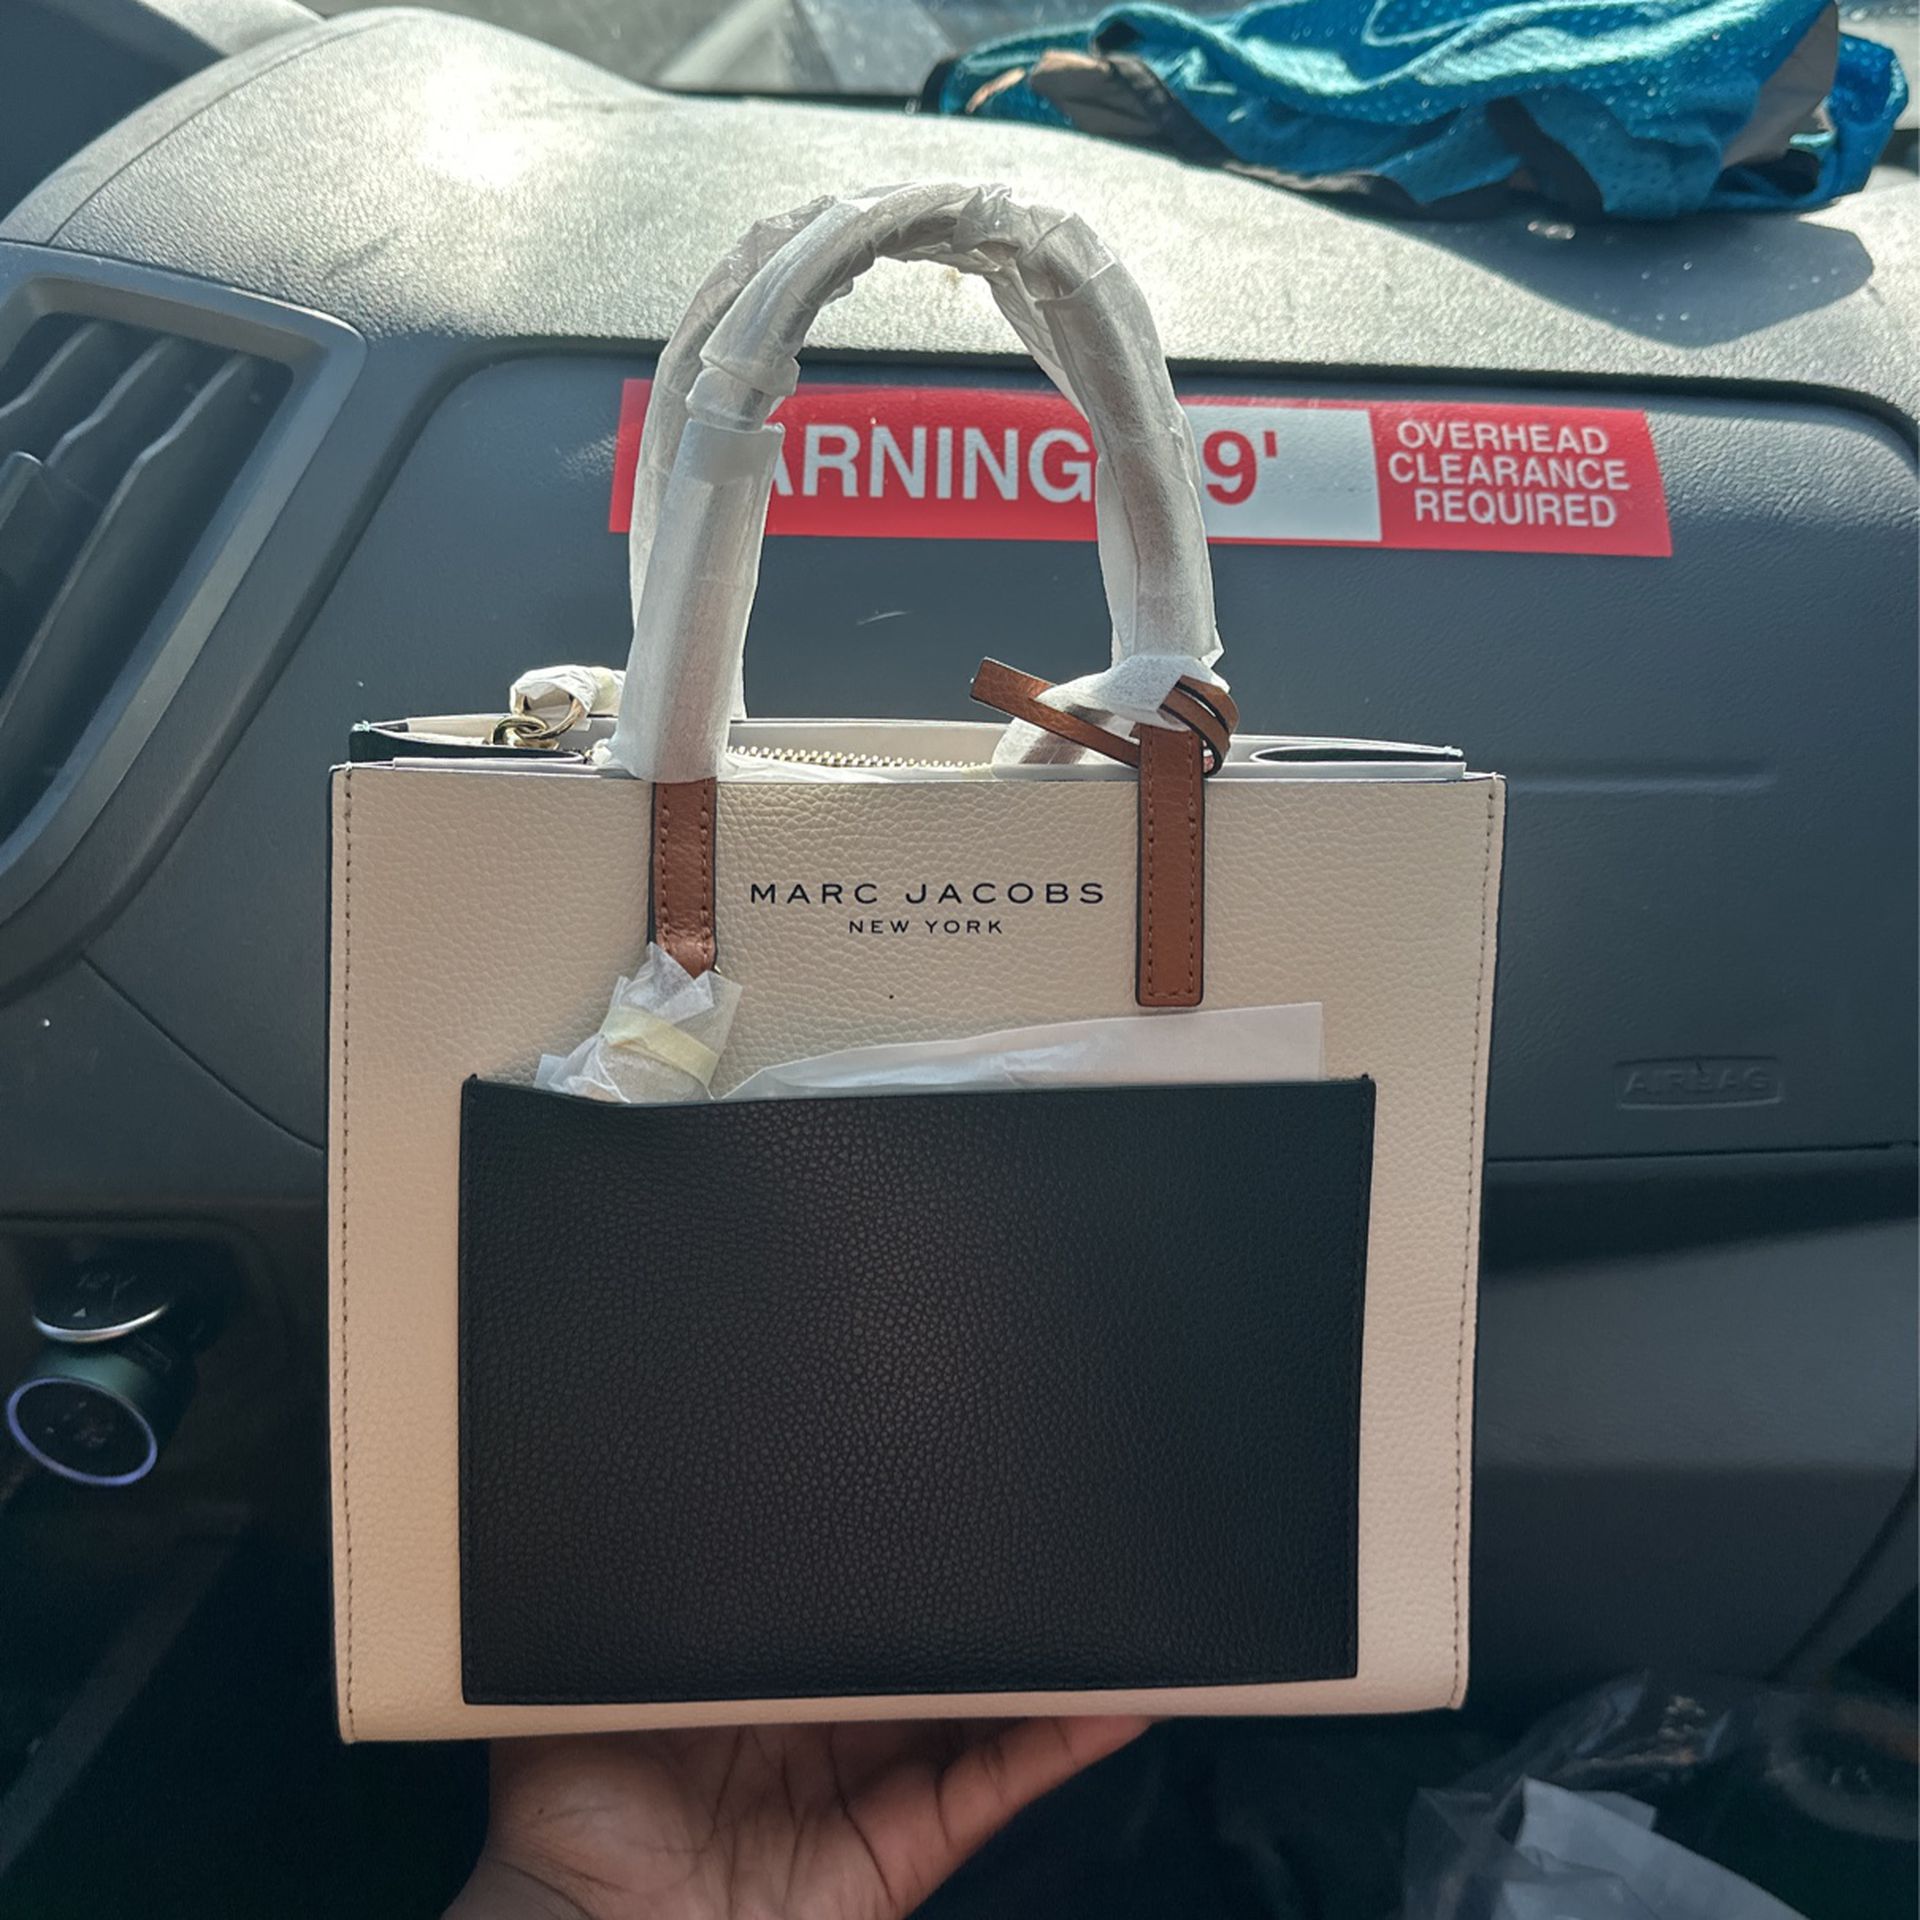 Brand New Marc Jacobs Bag for Sale in Arlington, TX - OfferUp